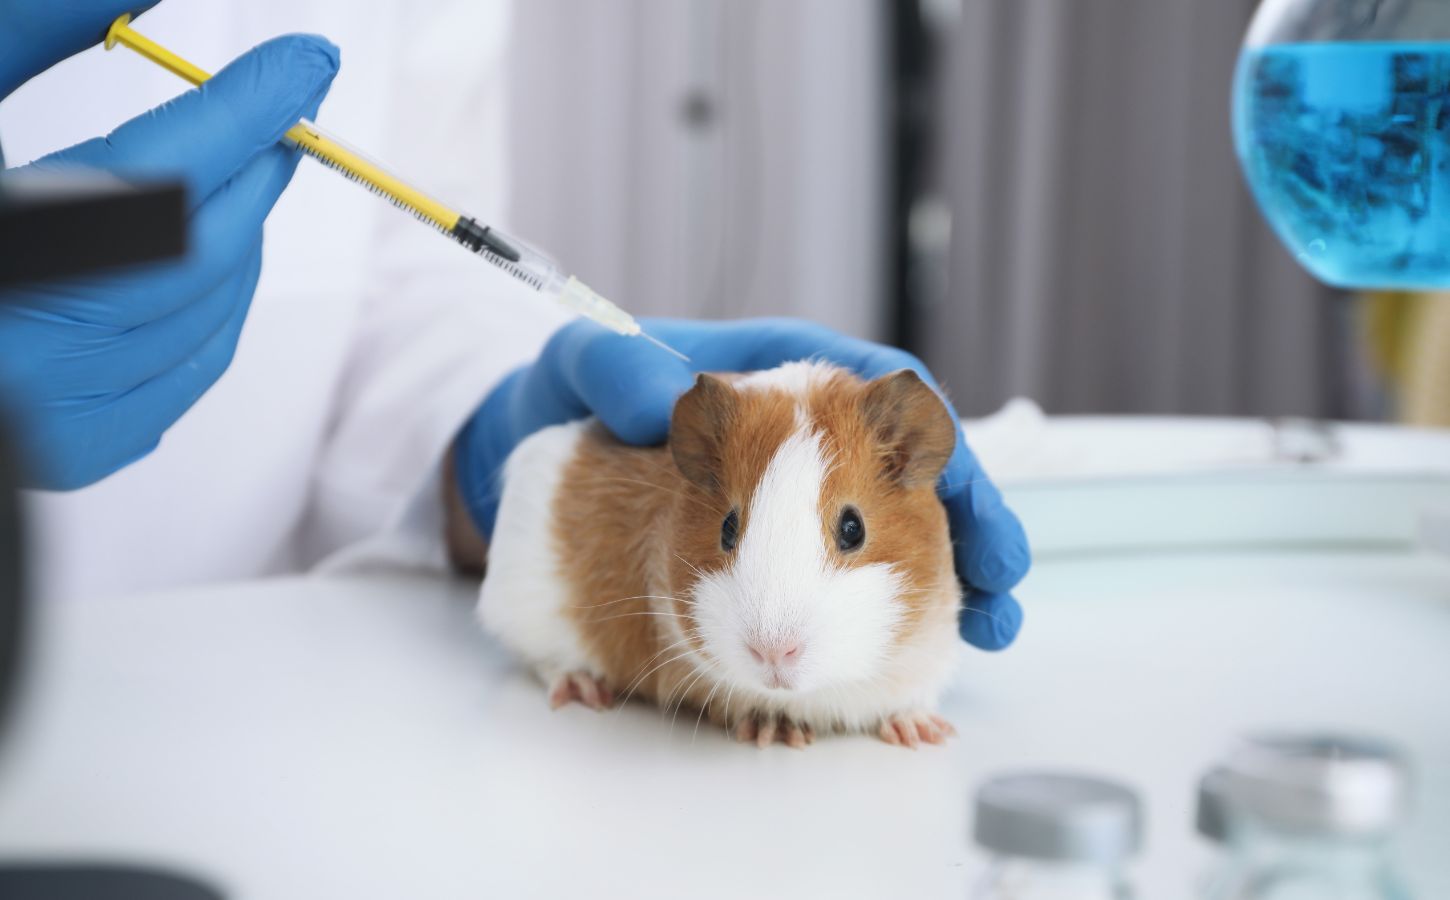 South Korea Will No Longer Require Toxicity Tests On Mice And Guinea Pigs